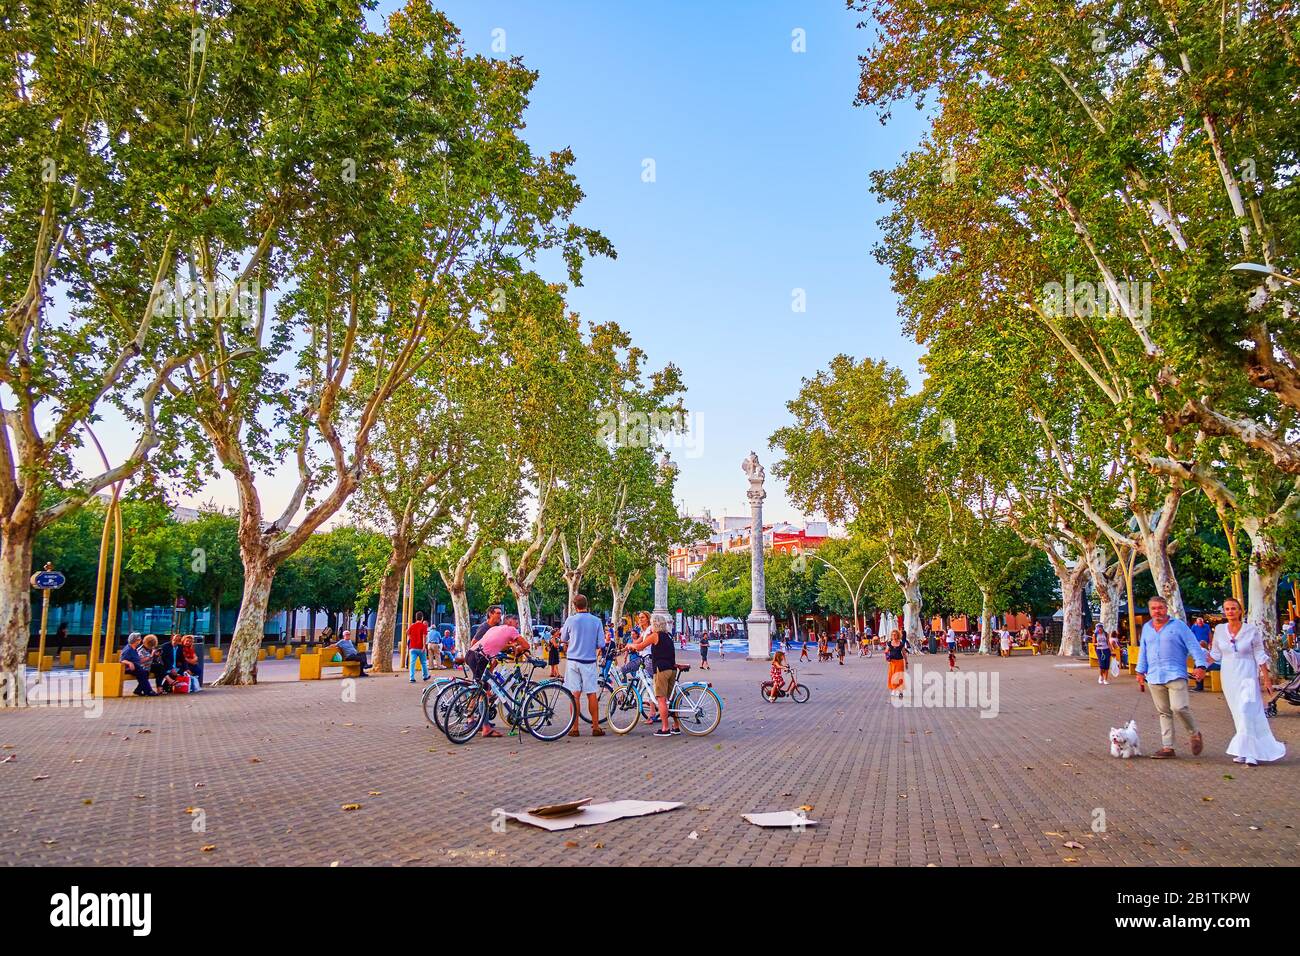 SEVILLE, SPAIN - OCTOBER 1, 2019: La Alameda square with large pedestrian area is one of the most beloved places for evening walks and the fine meetin Stock Photo